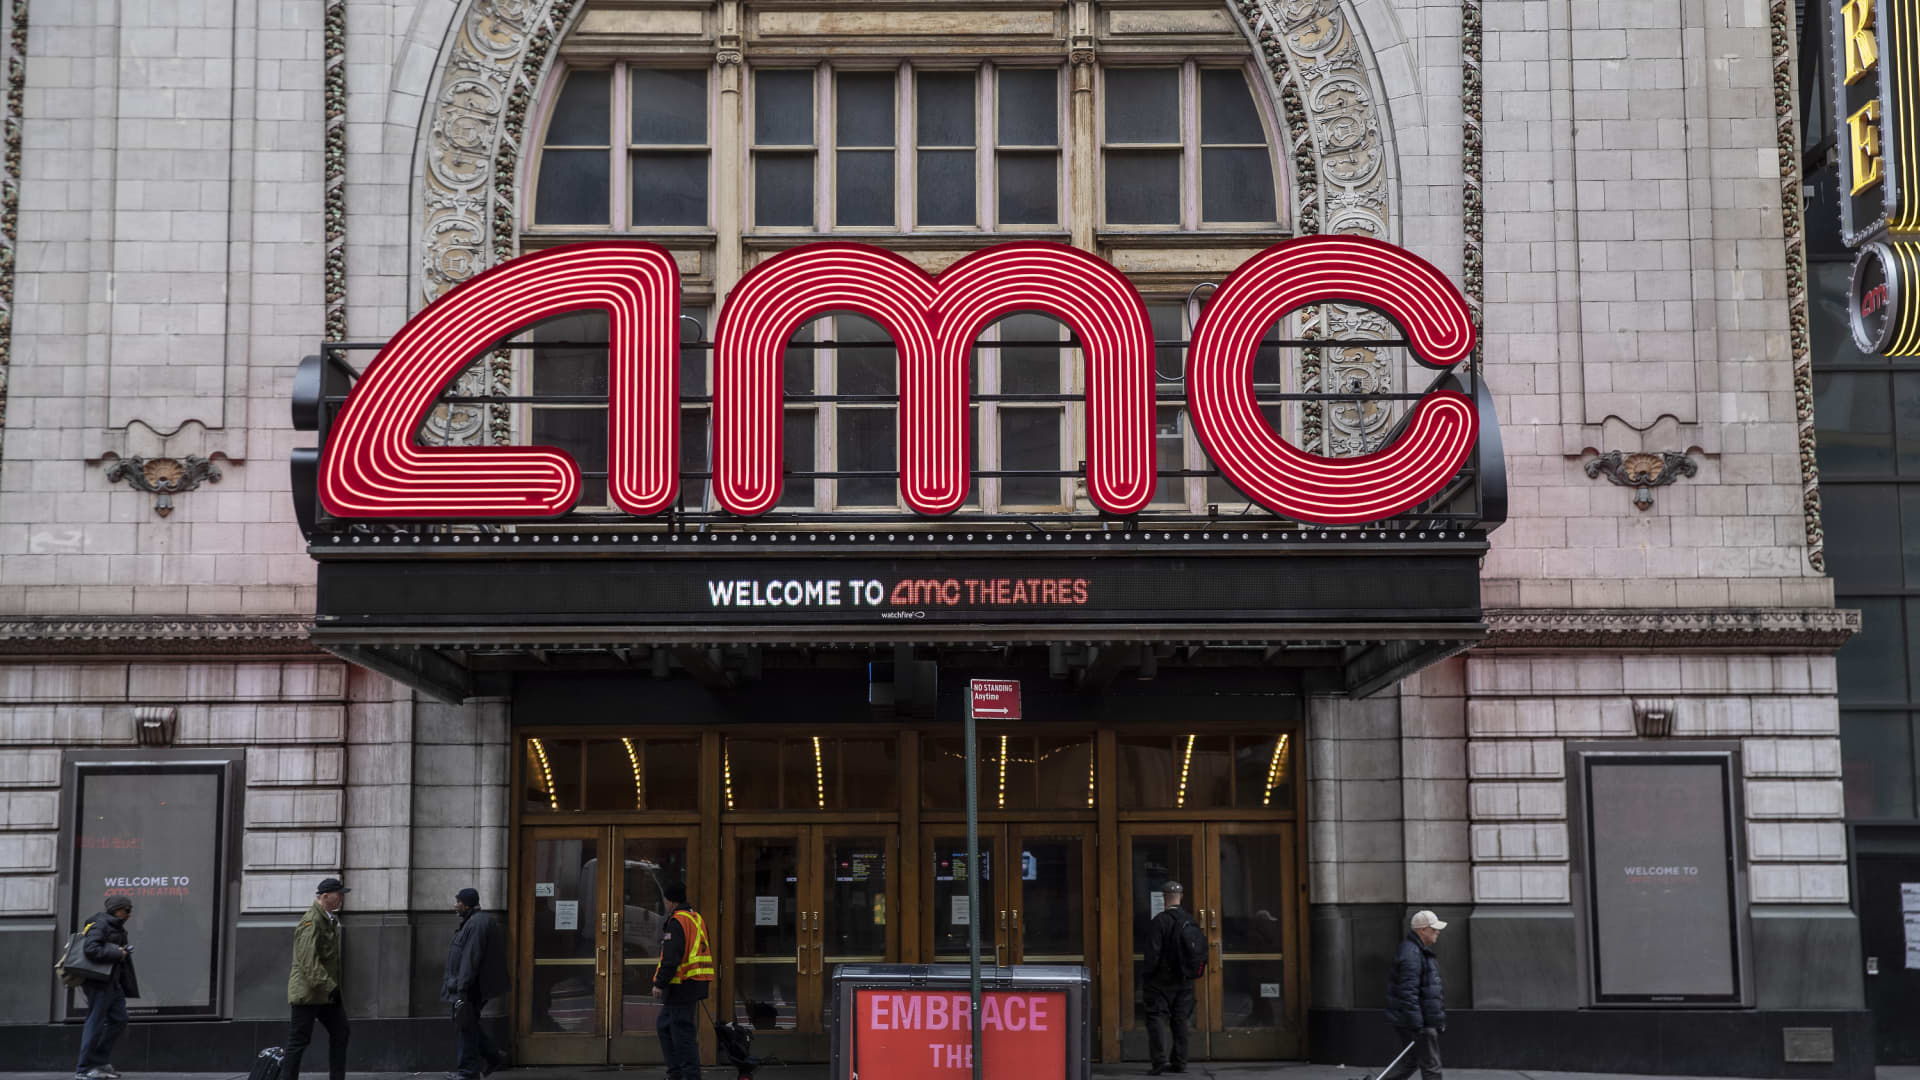 AMC raises $250 million in stock during meme rally, with shares still up 90% in premarket